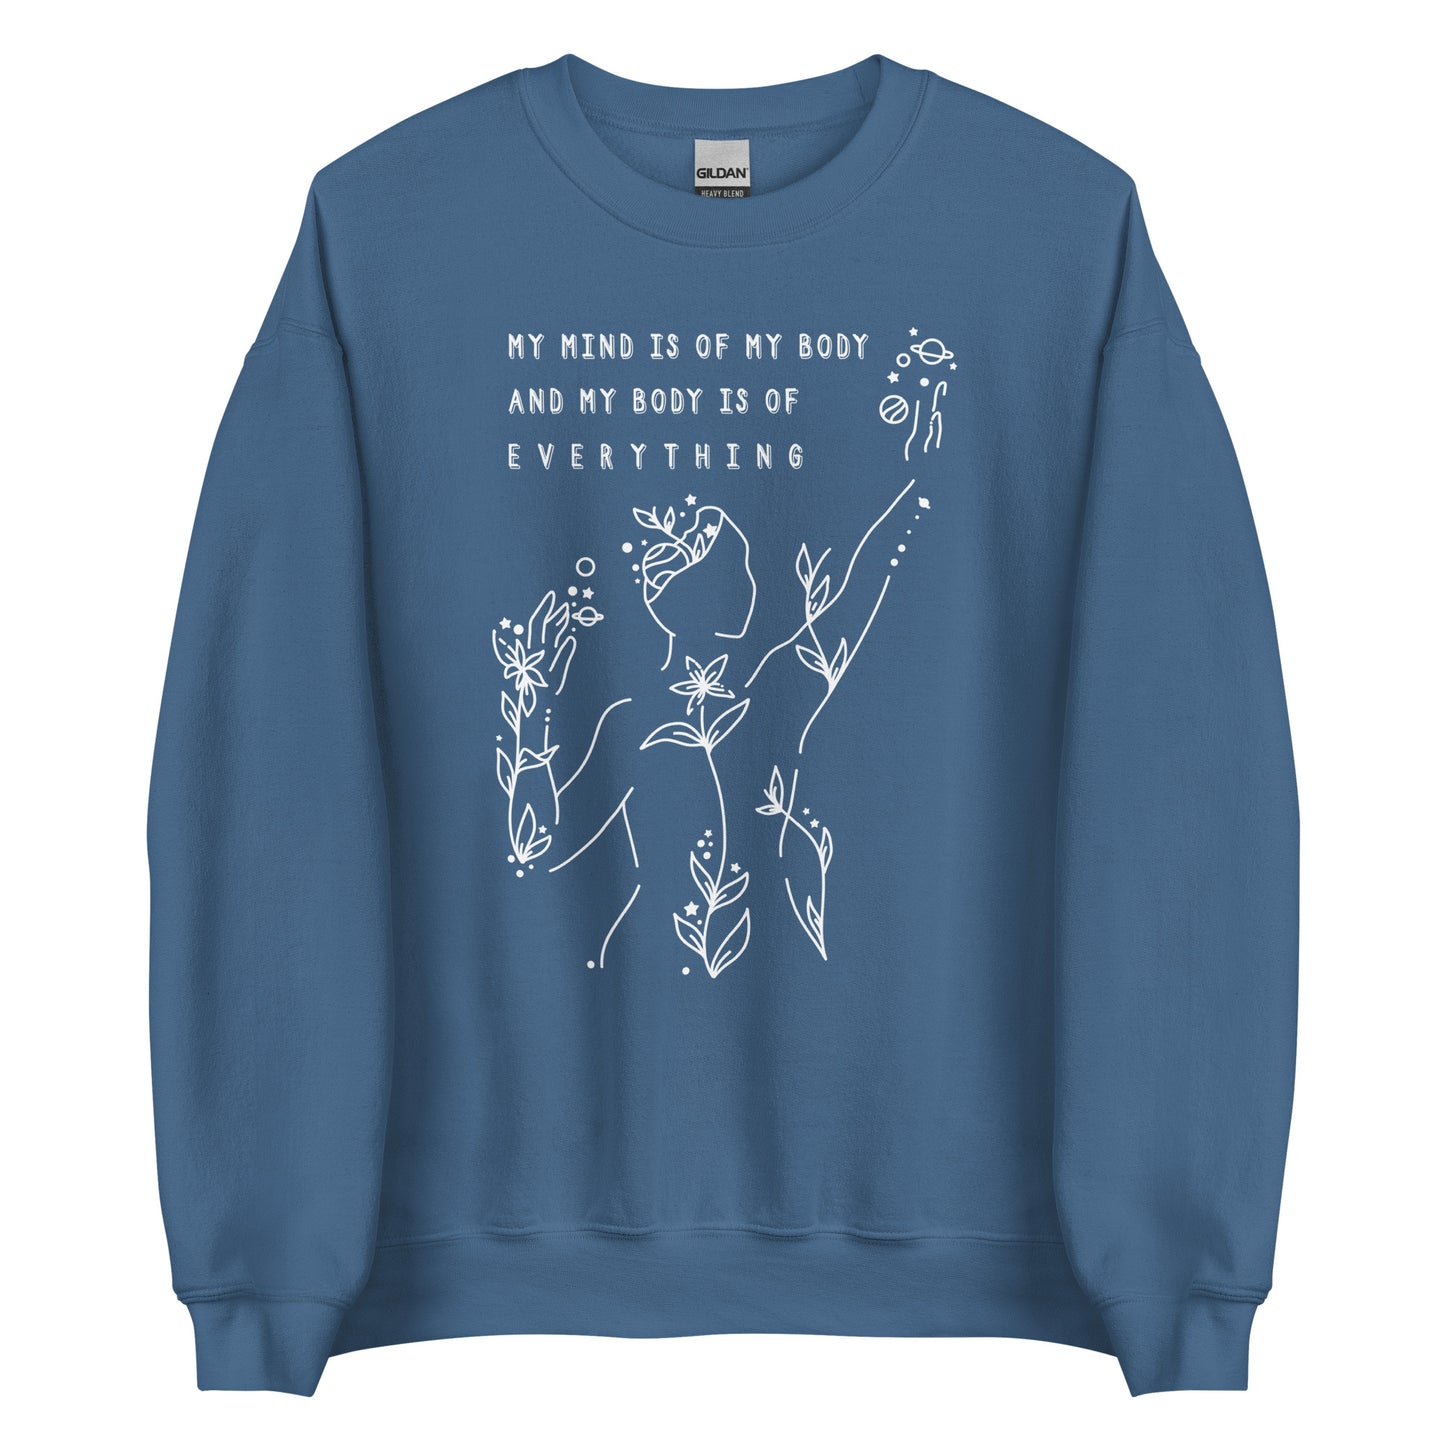 A blue crewneck sweatshirt featuring an abstract illustration of a figure whose body is spreading out into plants and planets and stars. Text above the figure reads "My mind is of my body and my body is of everything."